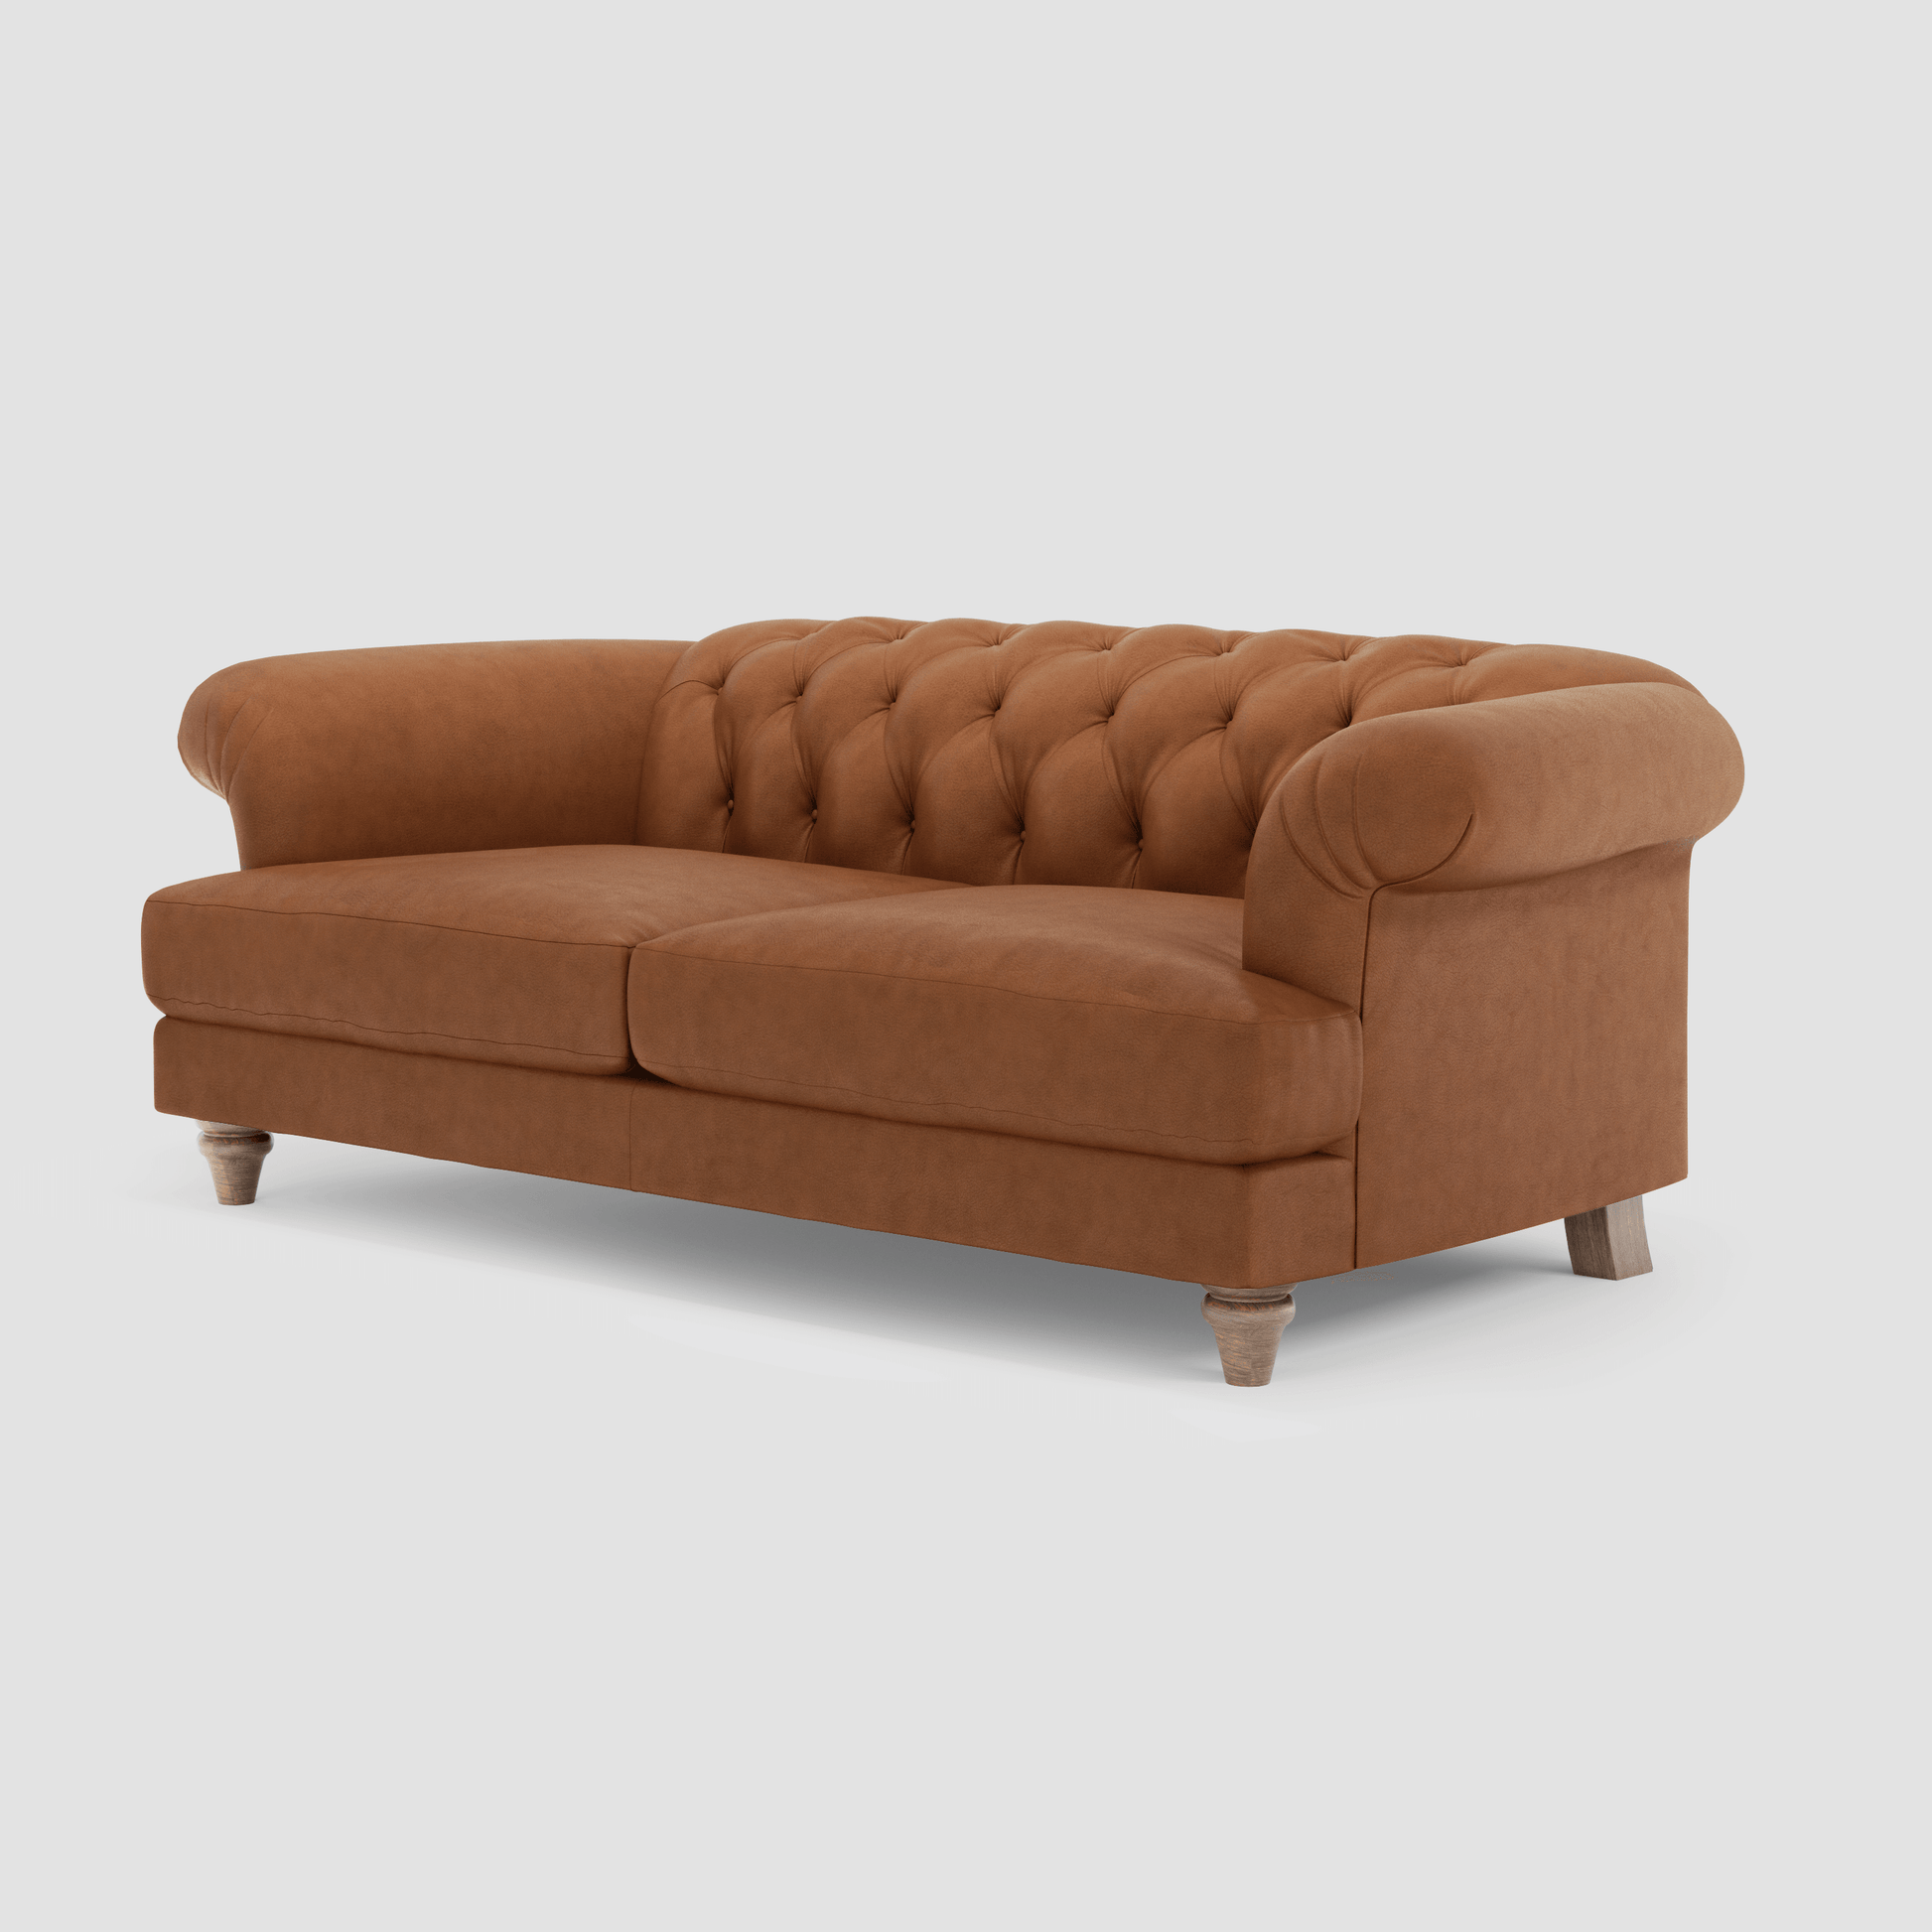 Kimber Two Seater Sofa - Flown the Coop